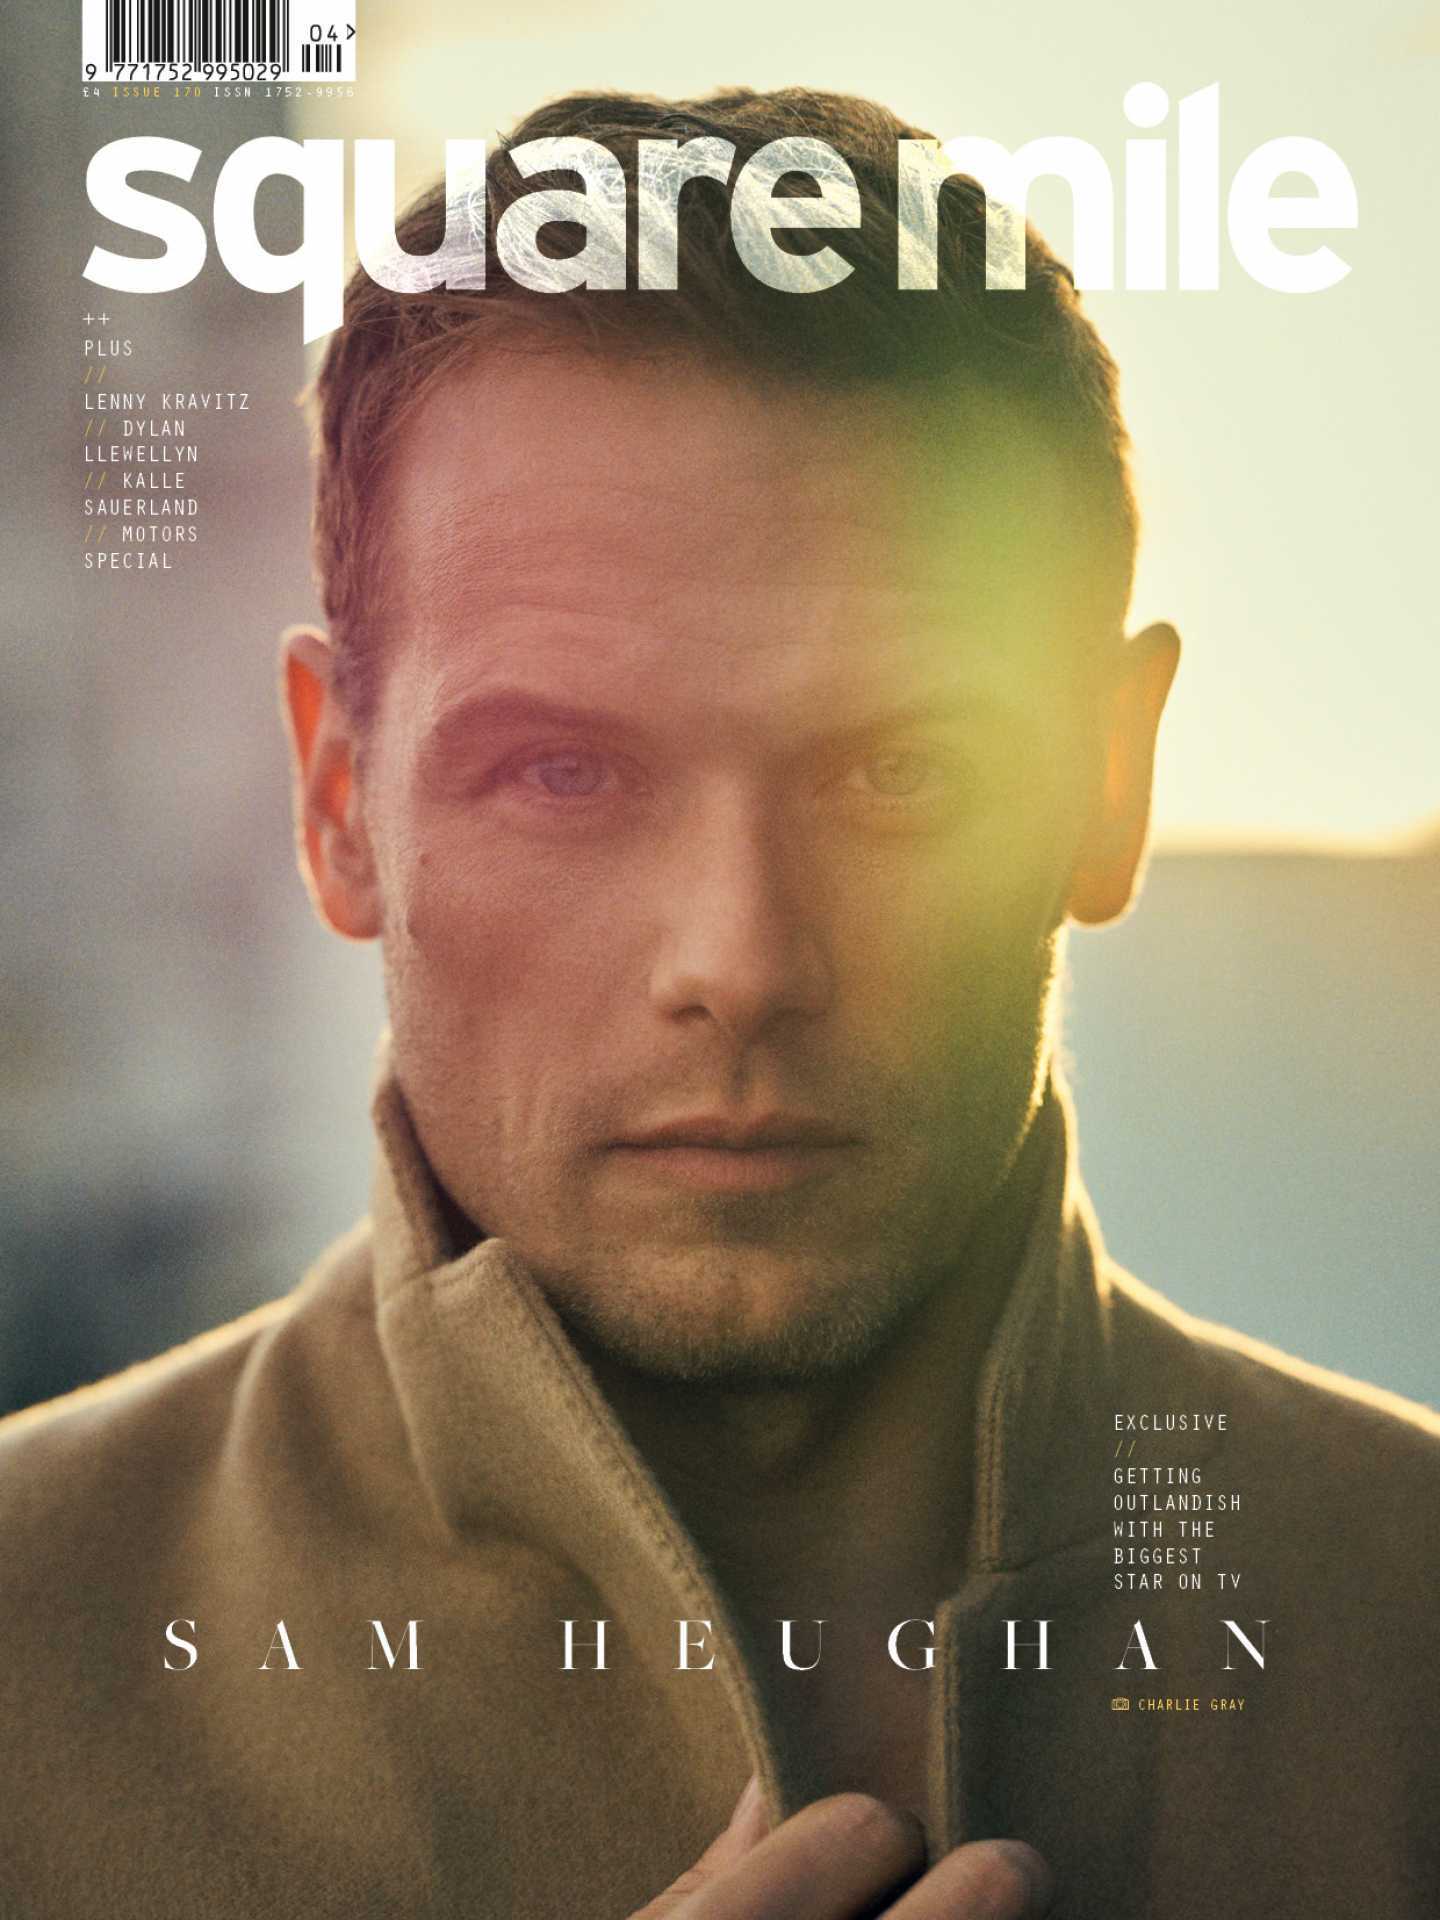 Sam Heughan photographed by Charlie Gray for Square Mile